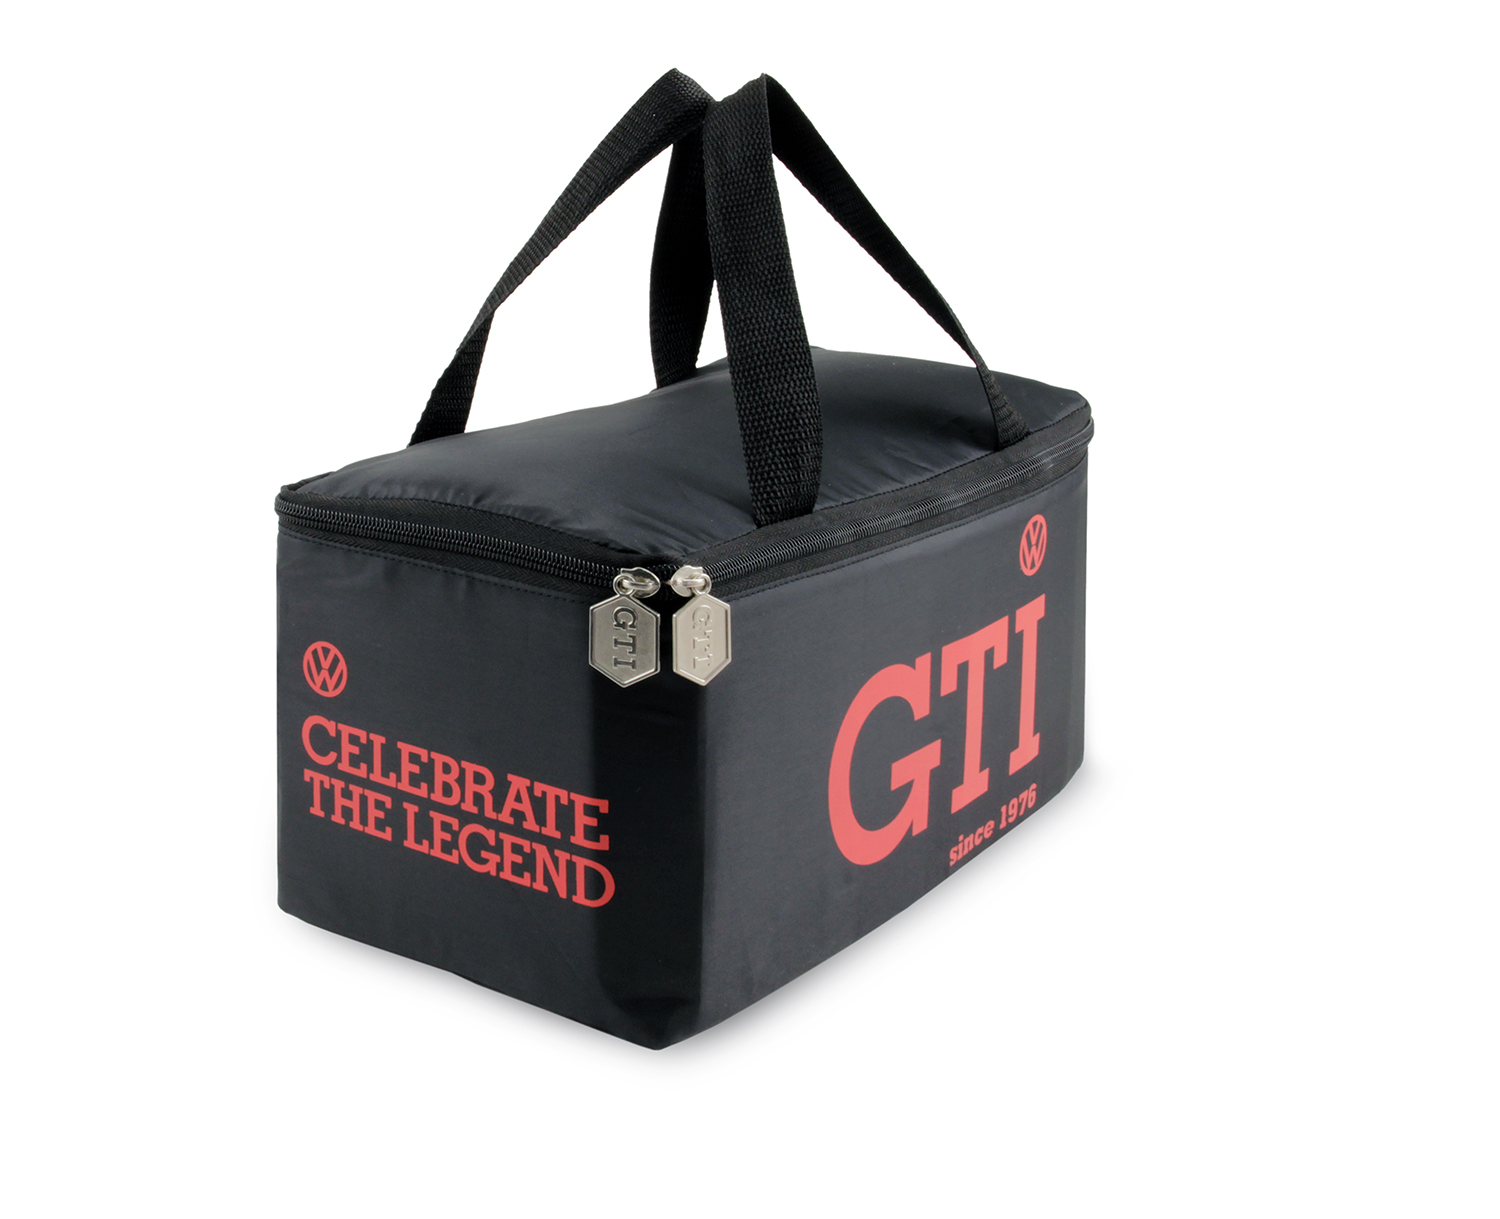 VW GTI Picnic Blanket (200x150cm) with Carry Bag